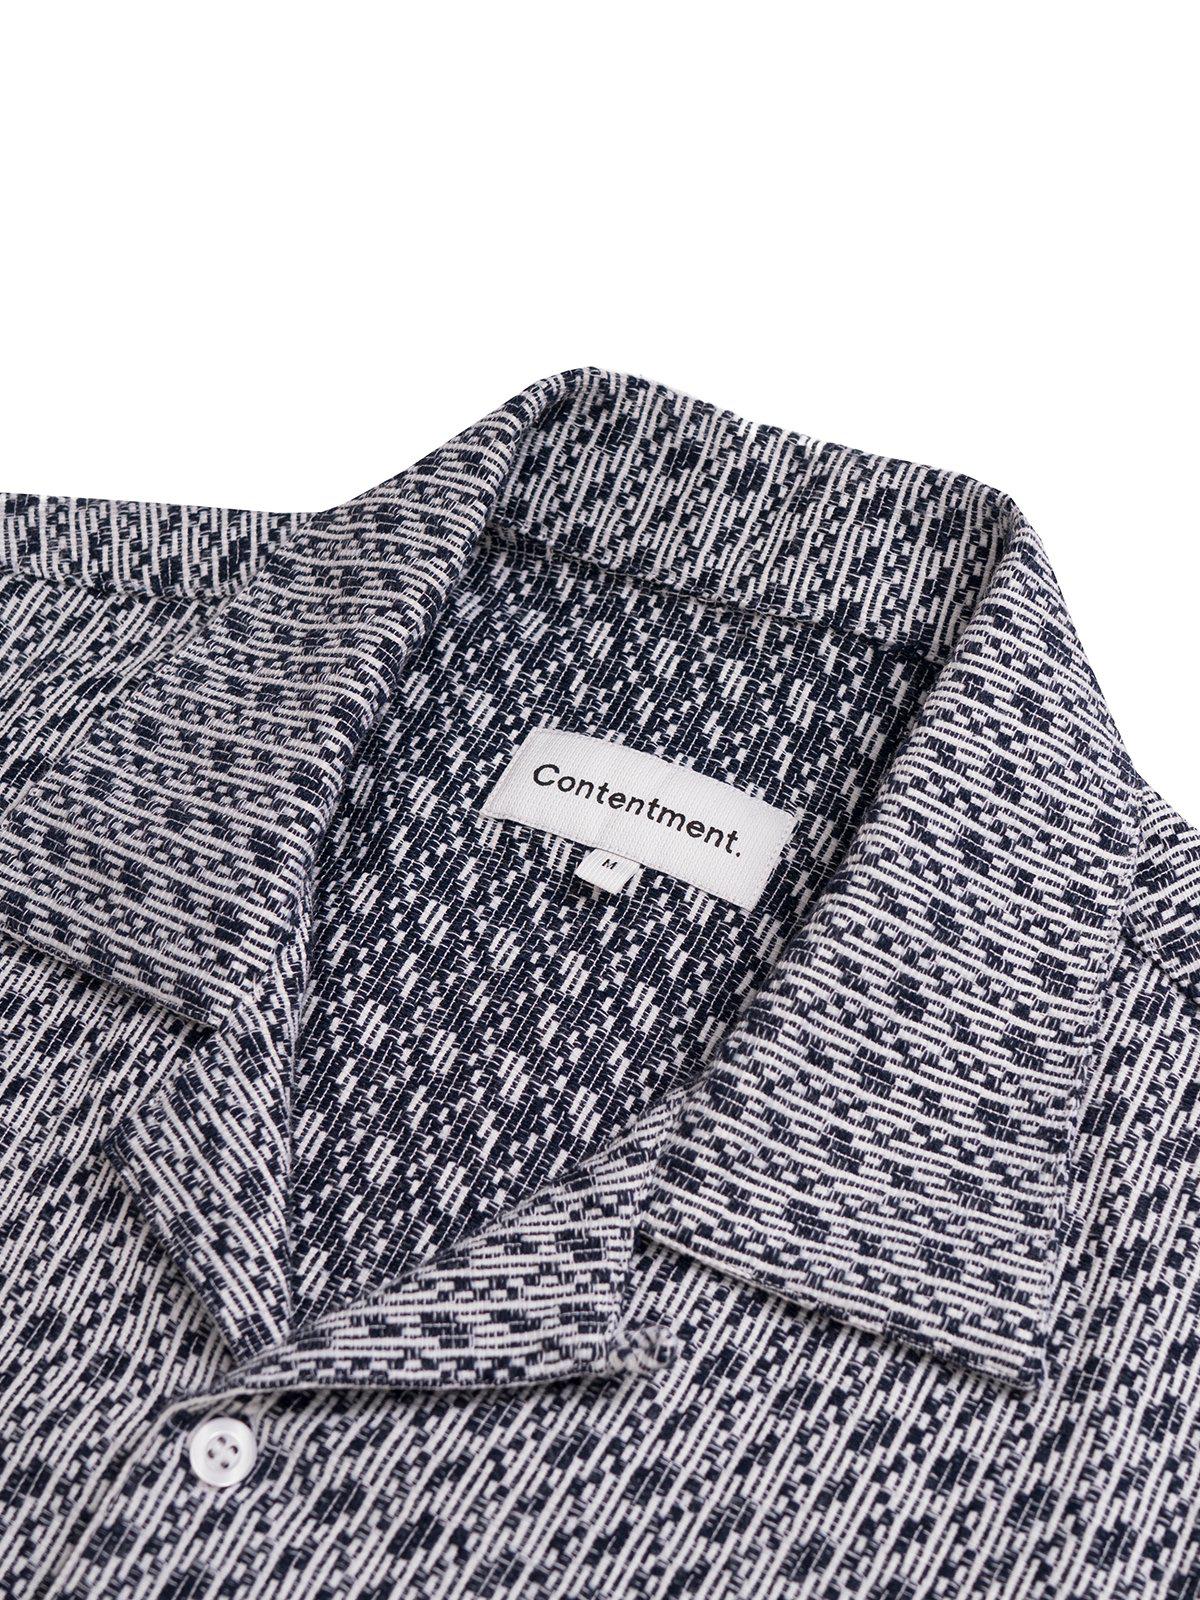 Contentment. Relaxed Textural Weave Shirt - MORE by Morello Indonesia